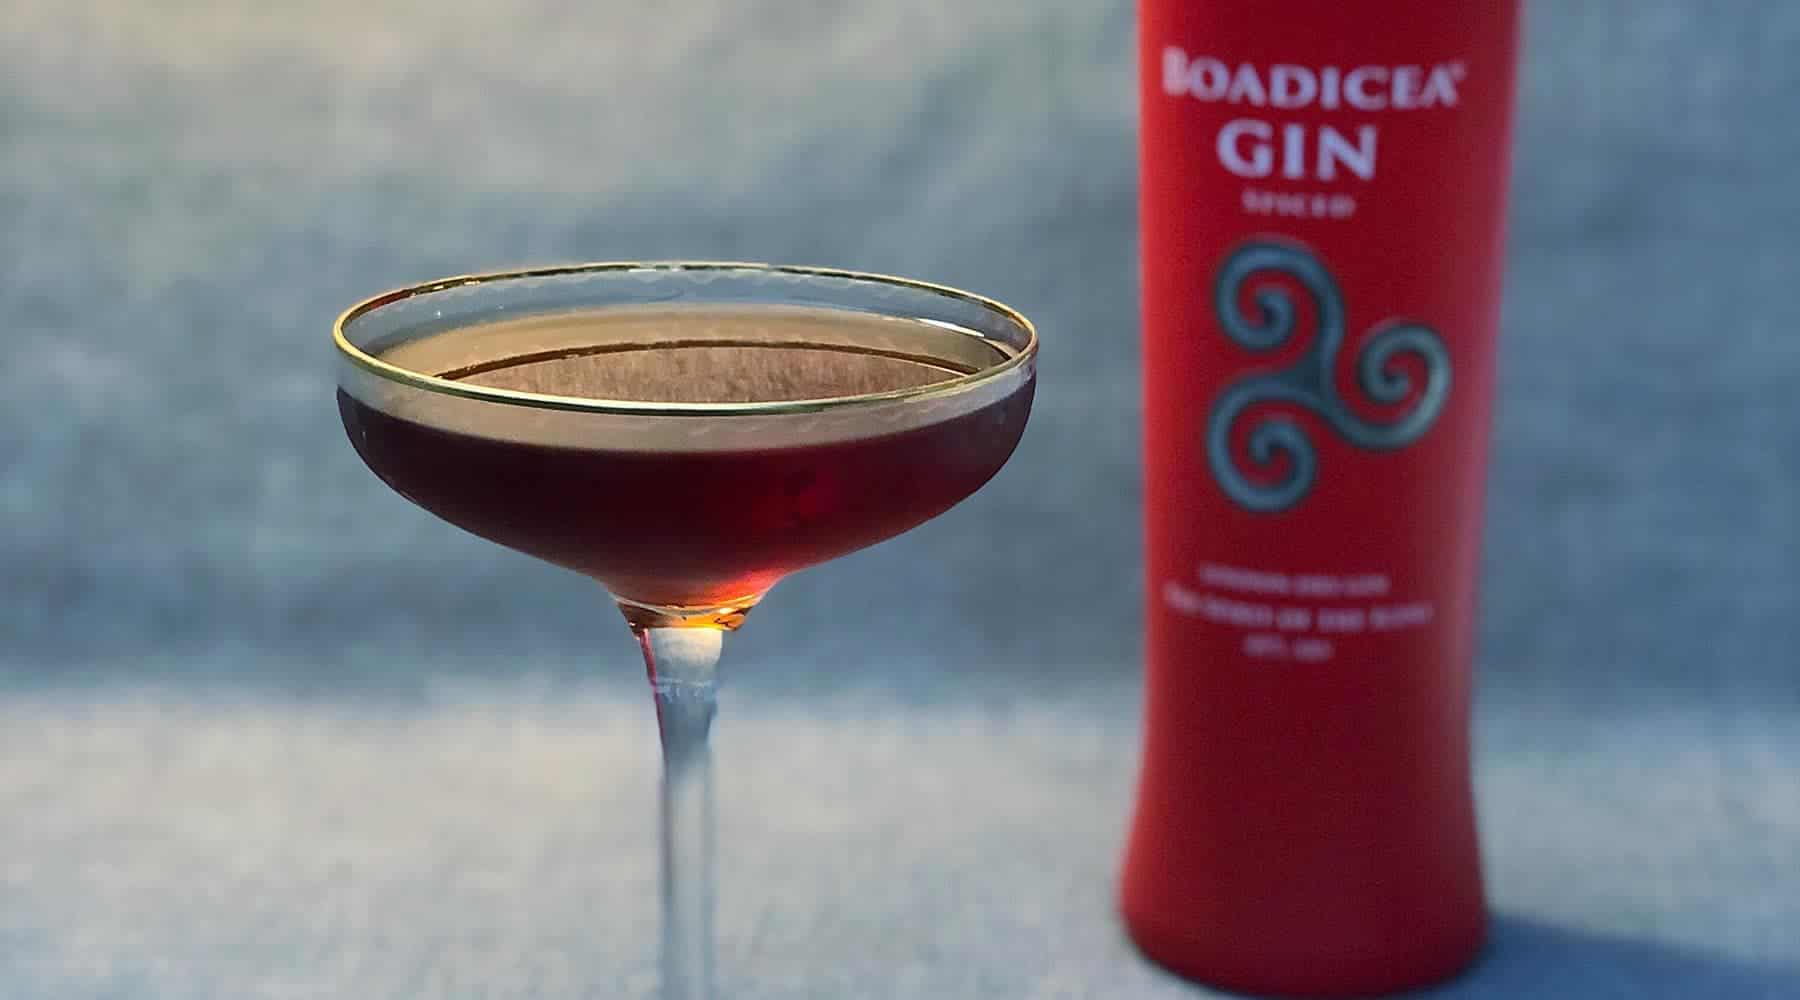 Boadicea® Gin - Spiced - The Path To Fame